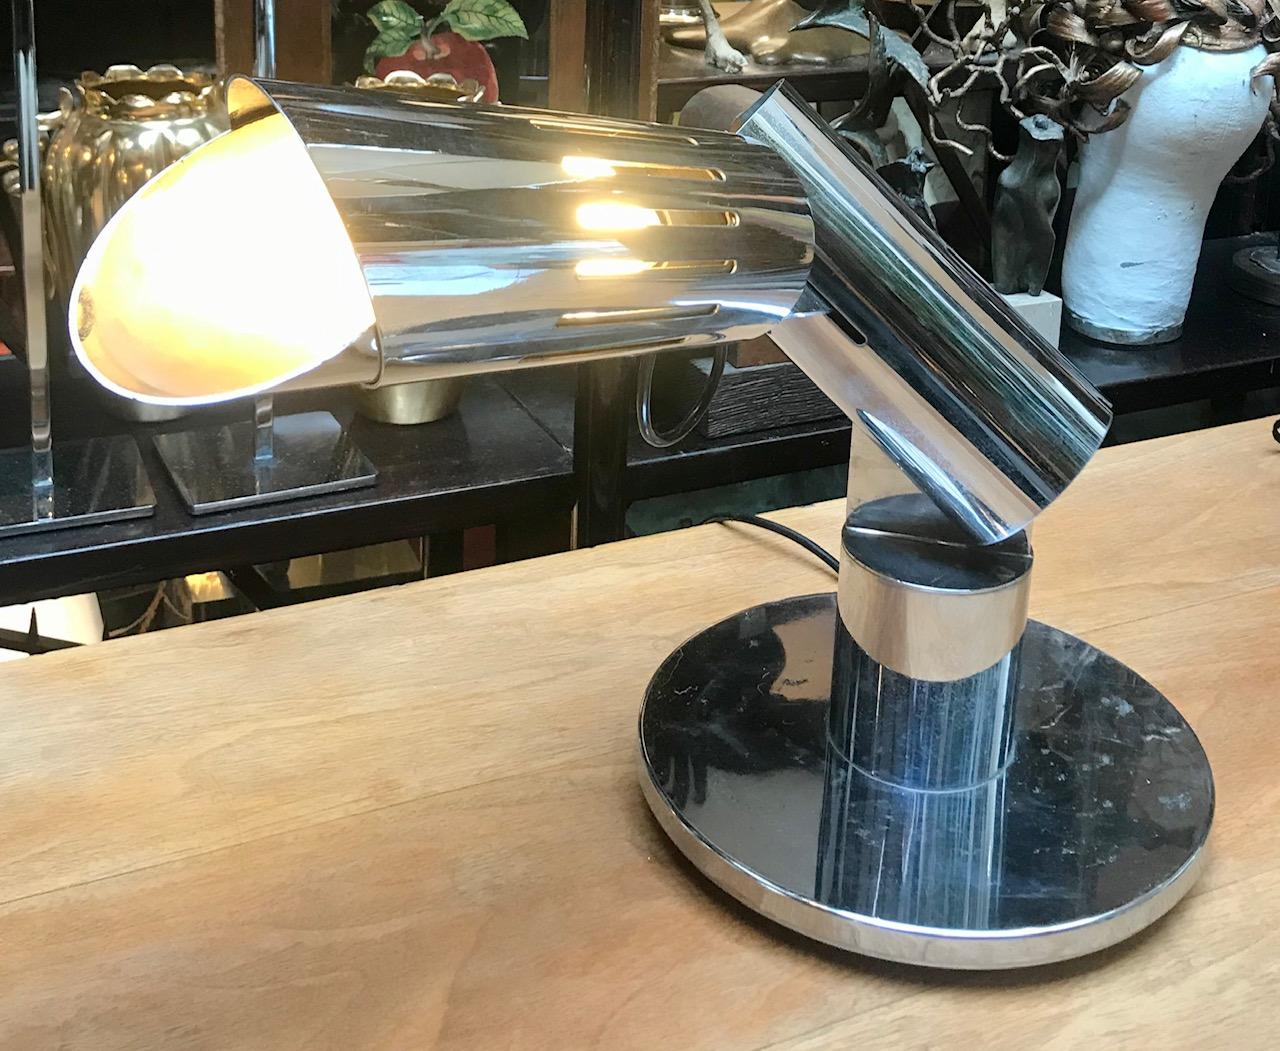 Stunning table lamp designed by Gabriel d'Ali and manufactured by Francesconi.

Chrome plated brass.

This light articulates into a variety of angles. Perforated cylinder can be twisted to display a range of photometric patterns.